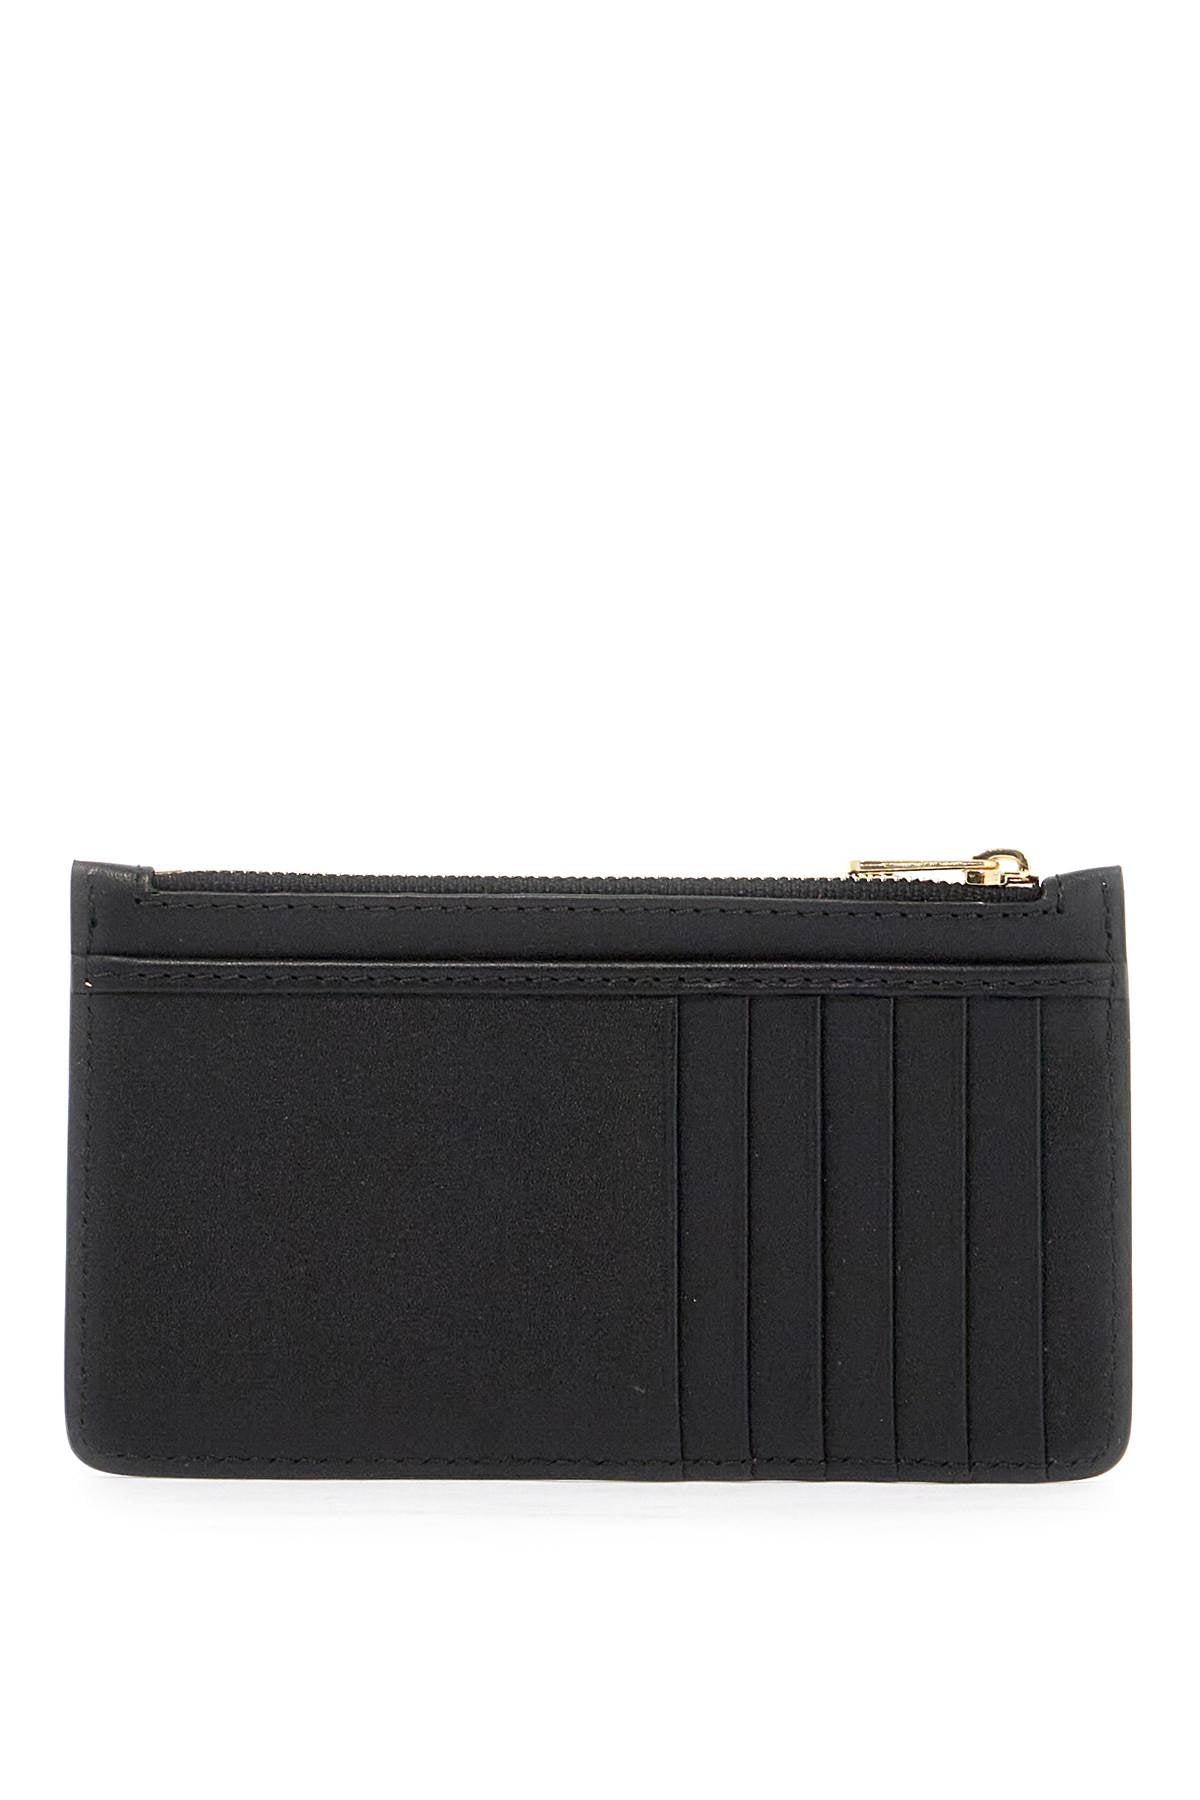 A.P.C. Willow Card Holder   Black